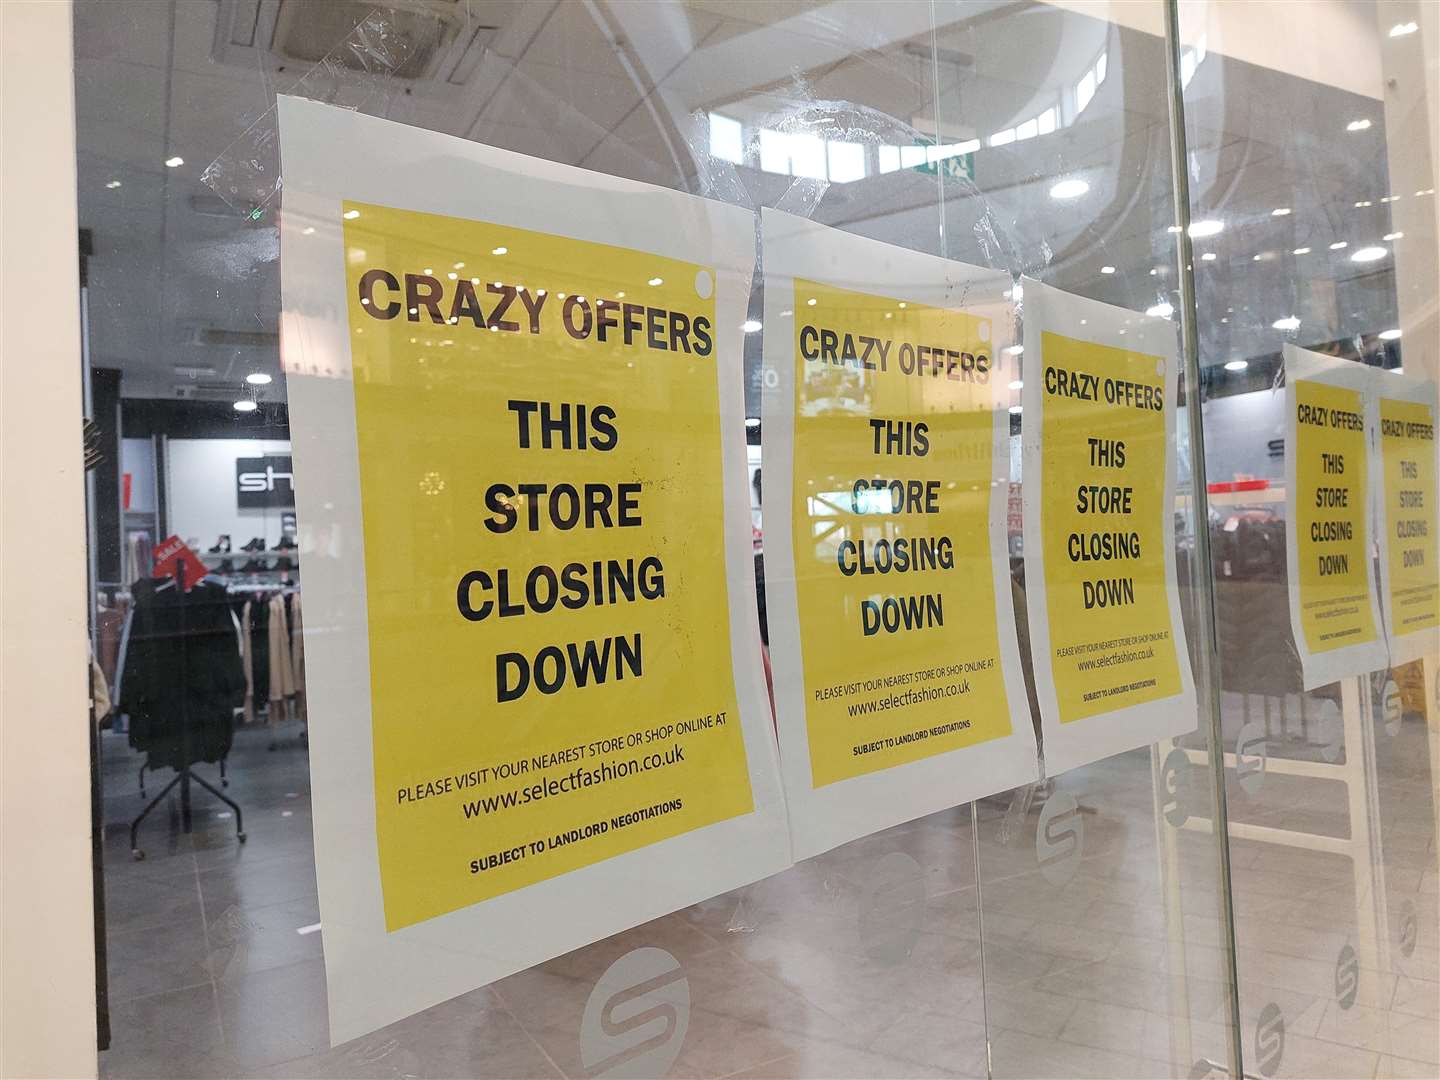 Signs displayed in the shop’s windows say “crazy offers, this store closing down”